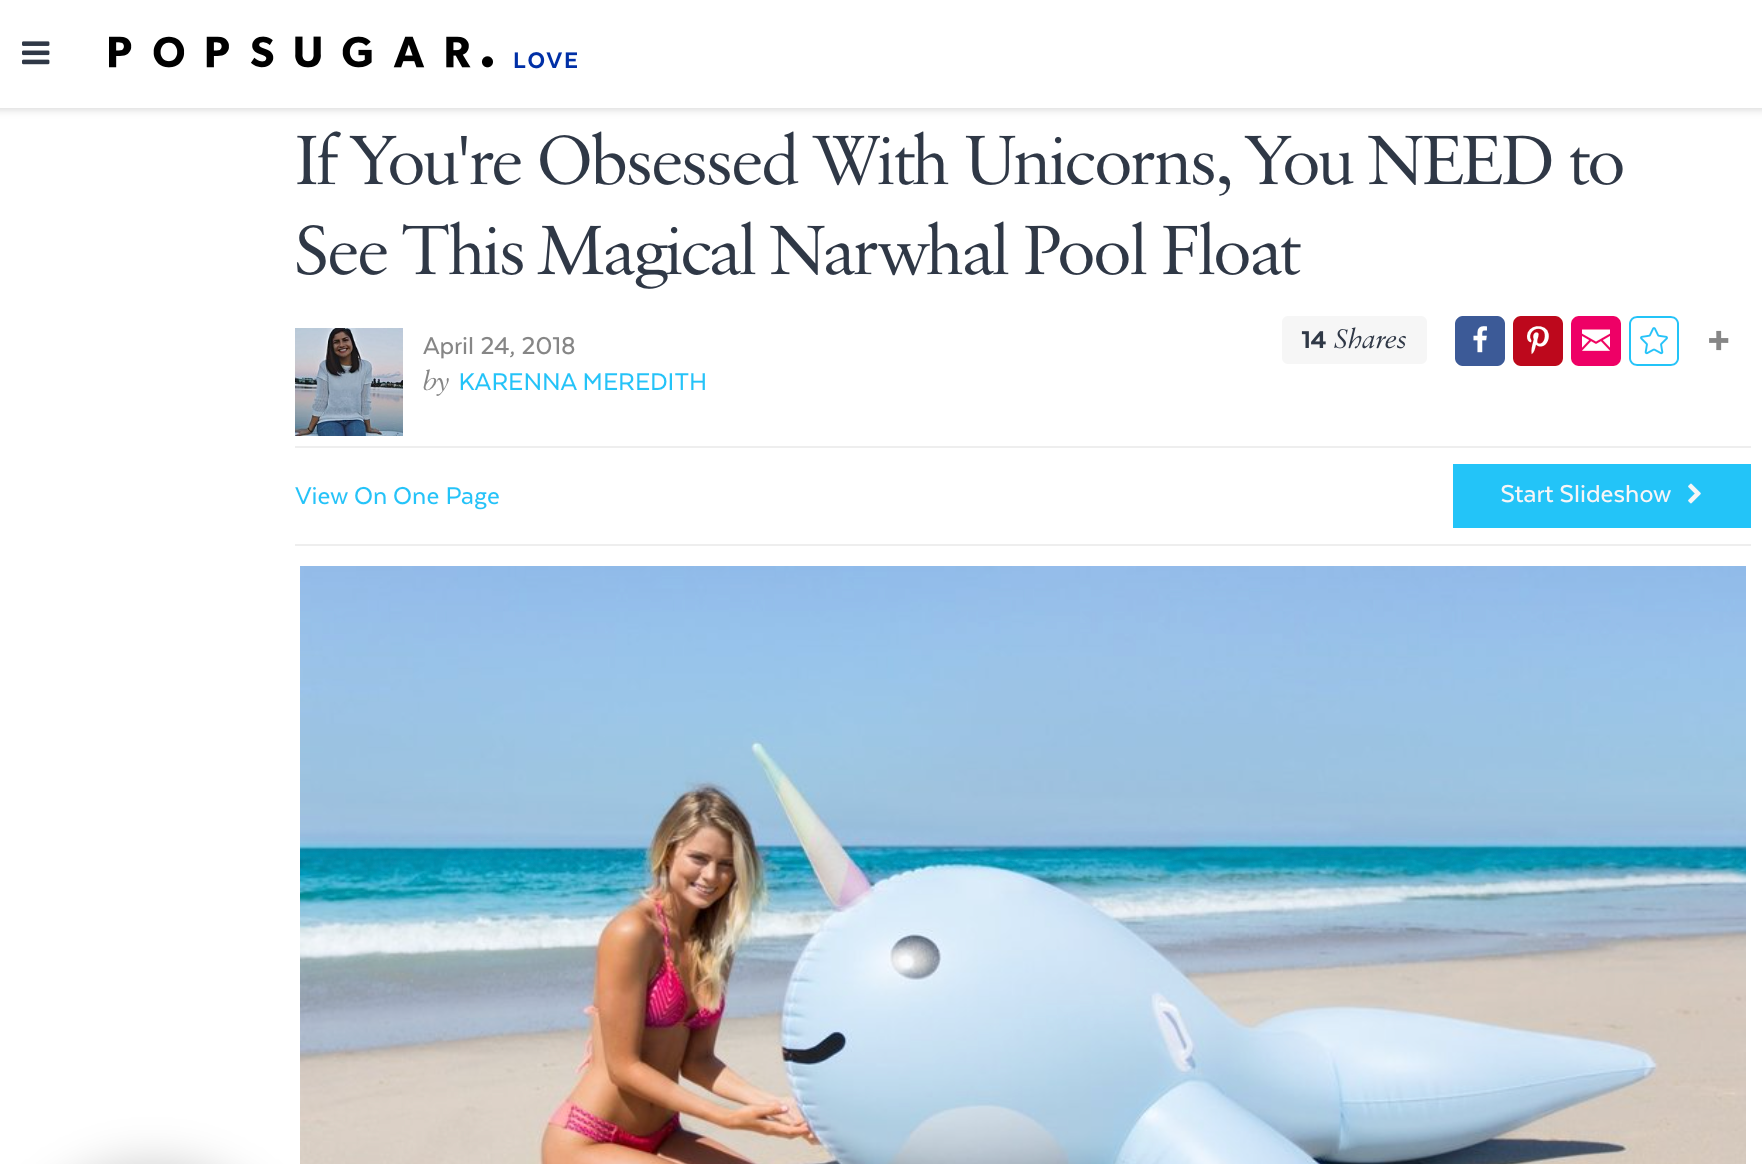 POPSUGAR: If You're Obsessed With Unicorns, You NEED to See This Magical Narwhal Pool Float